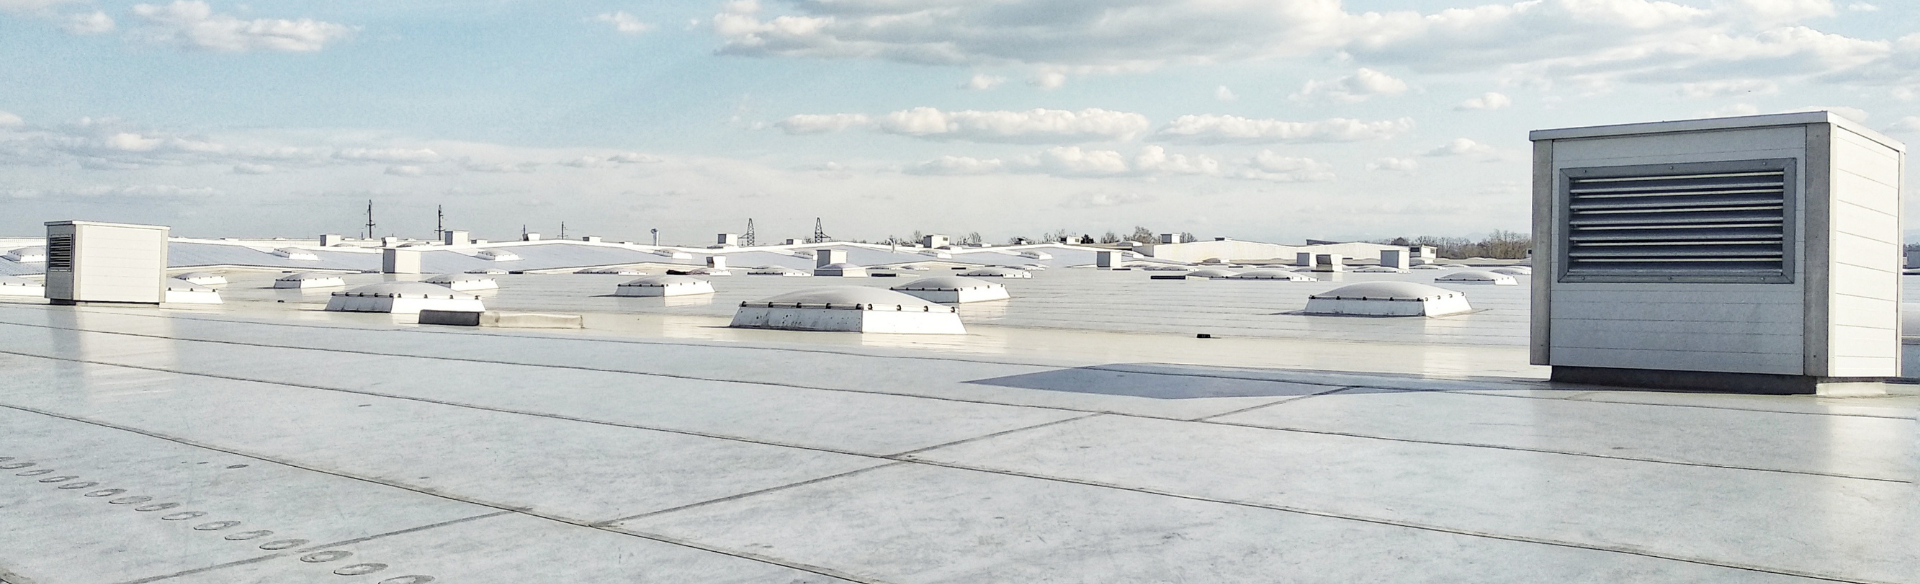 Winter Safety for Roofing Contractors Part 2 featured image